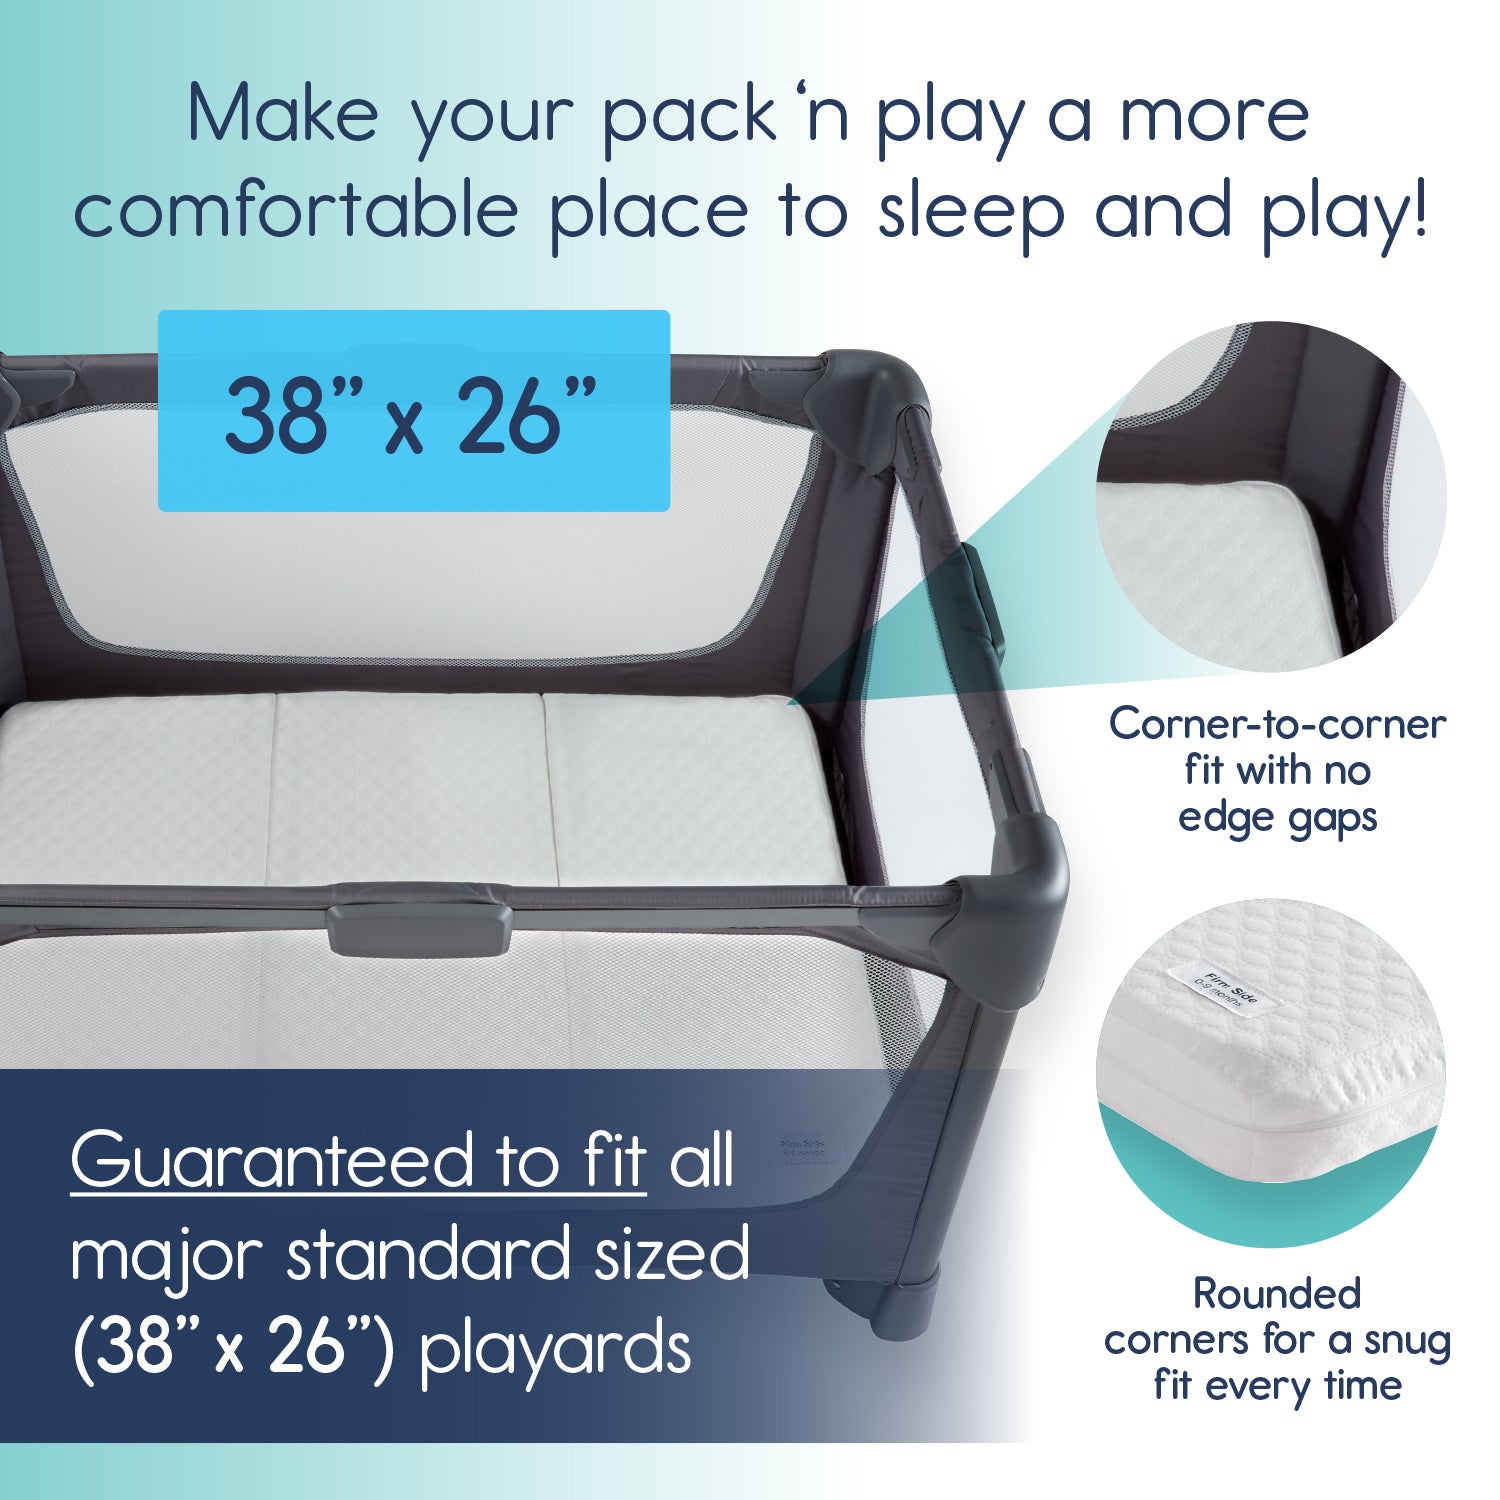 travel pack and play mattress